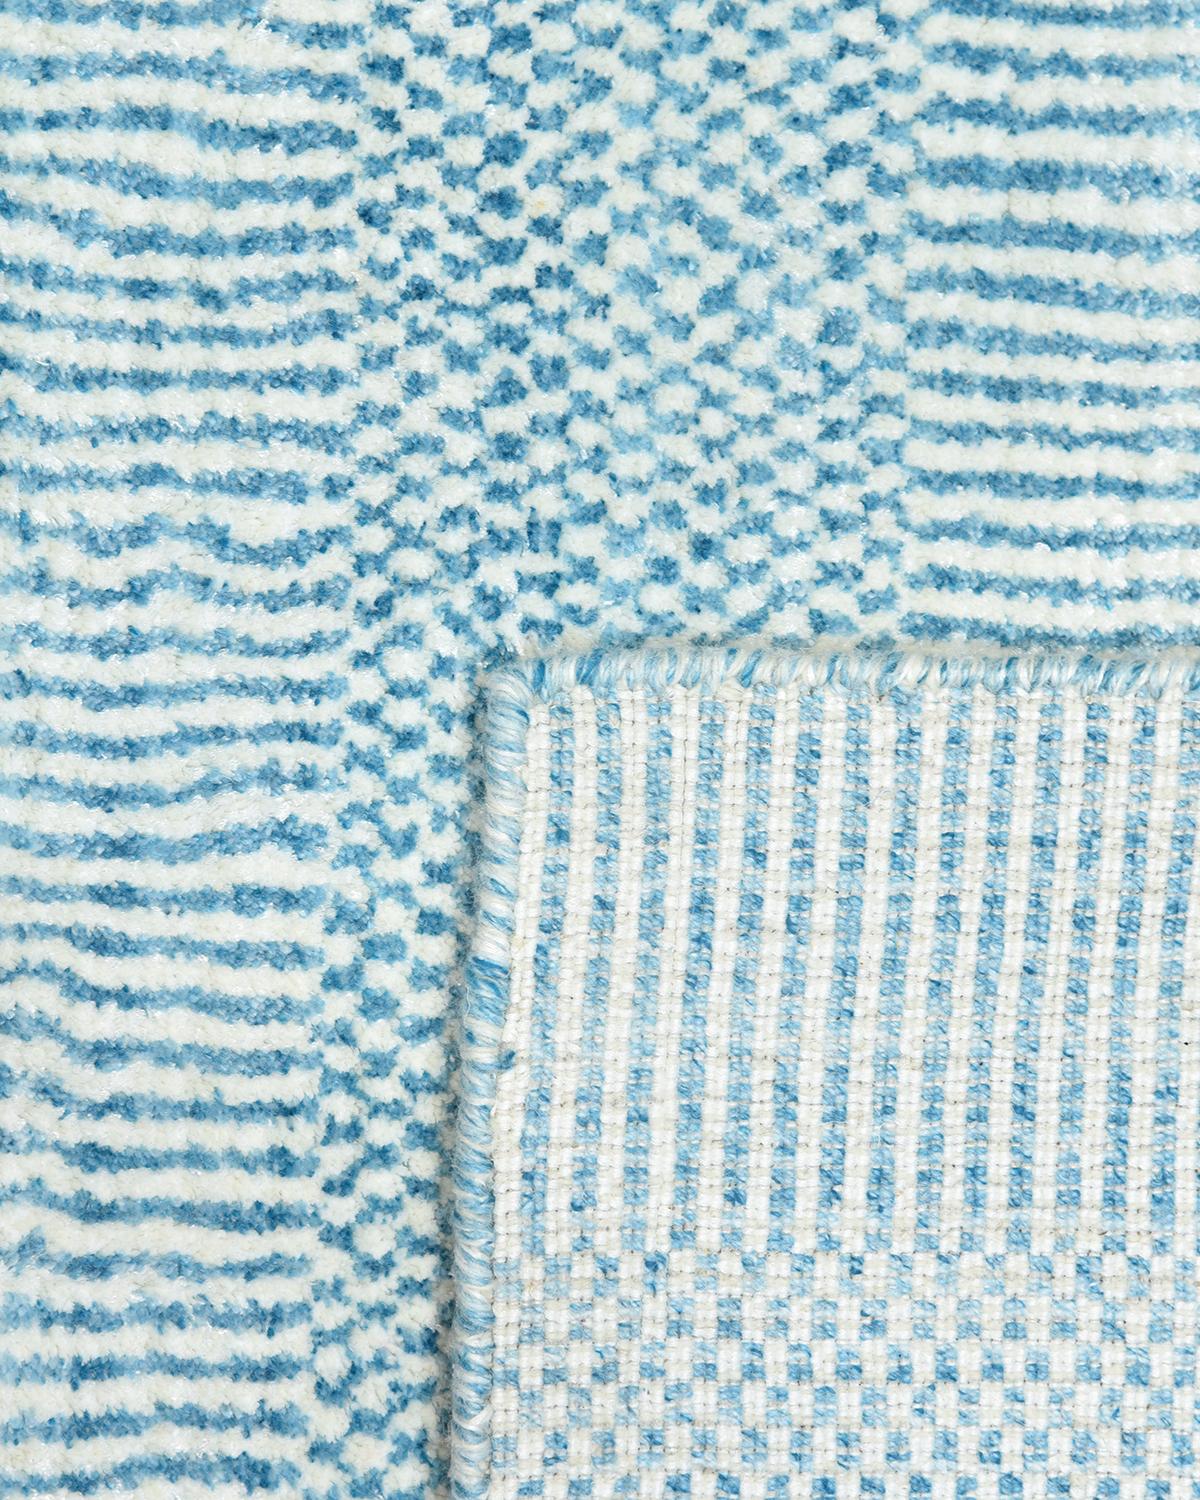 Color: Aqua, made in India. 60% wool, 30% viscose, 10% cotton. Subtle tone-on-tone stripes give the solid collection a depth and sophistication all its own. These rugs can pull the disparate elements of a room into a beautifully cohesive whole; they